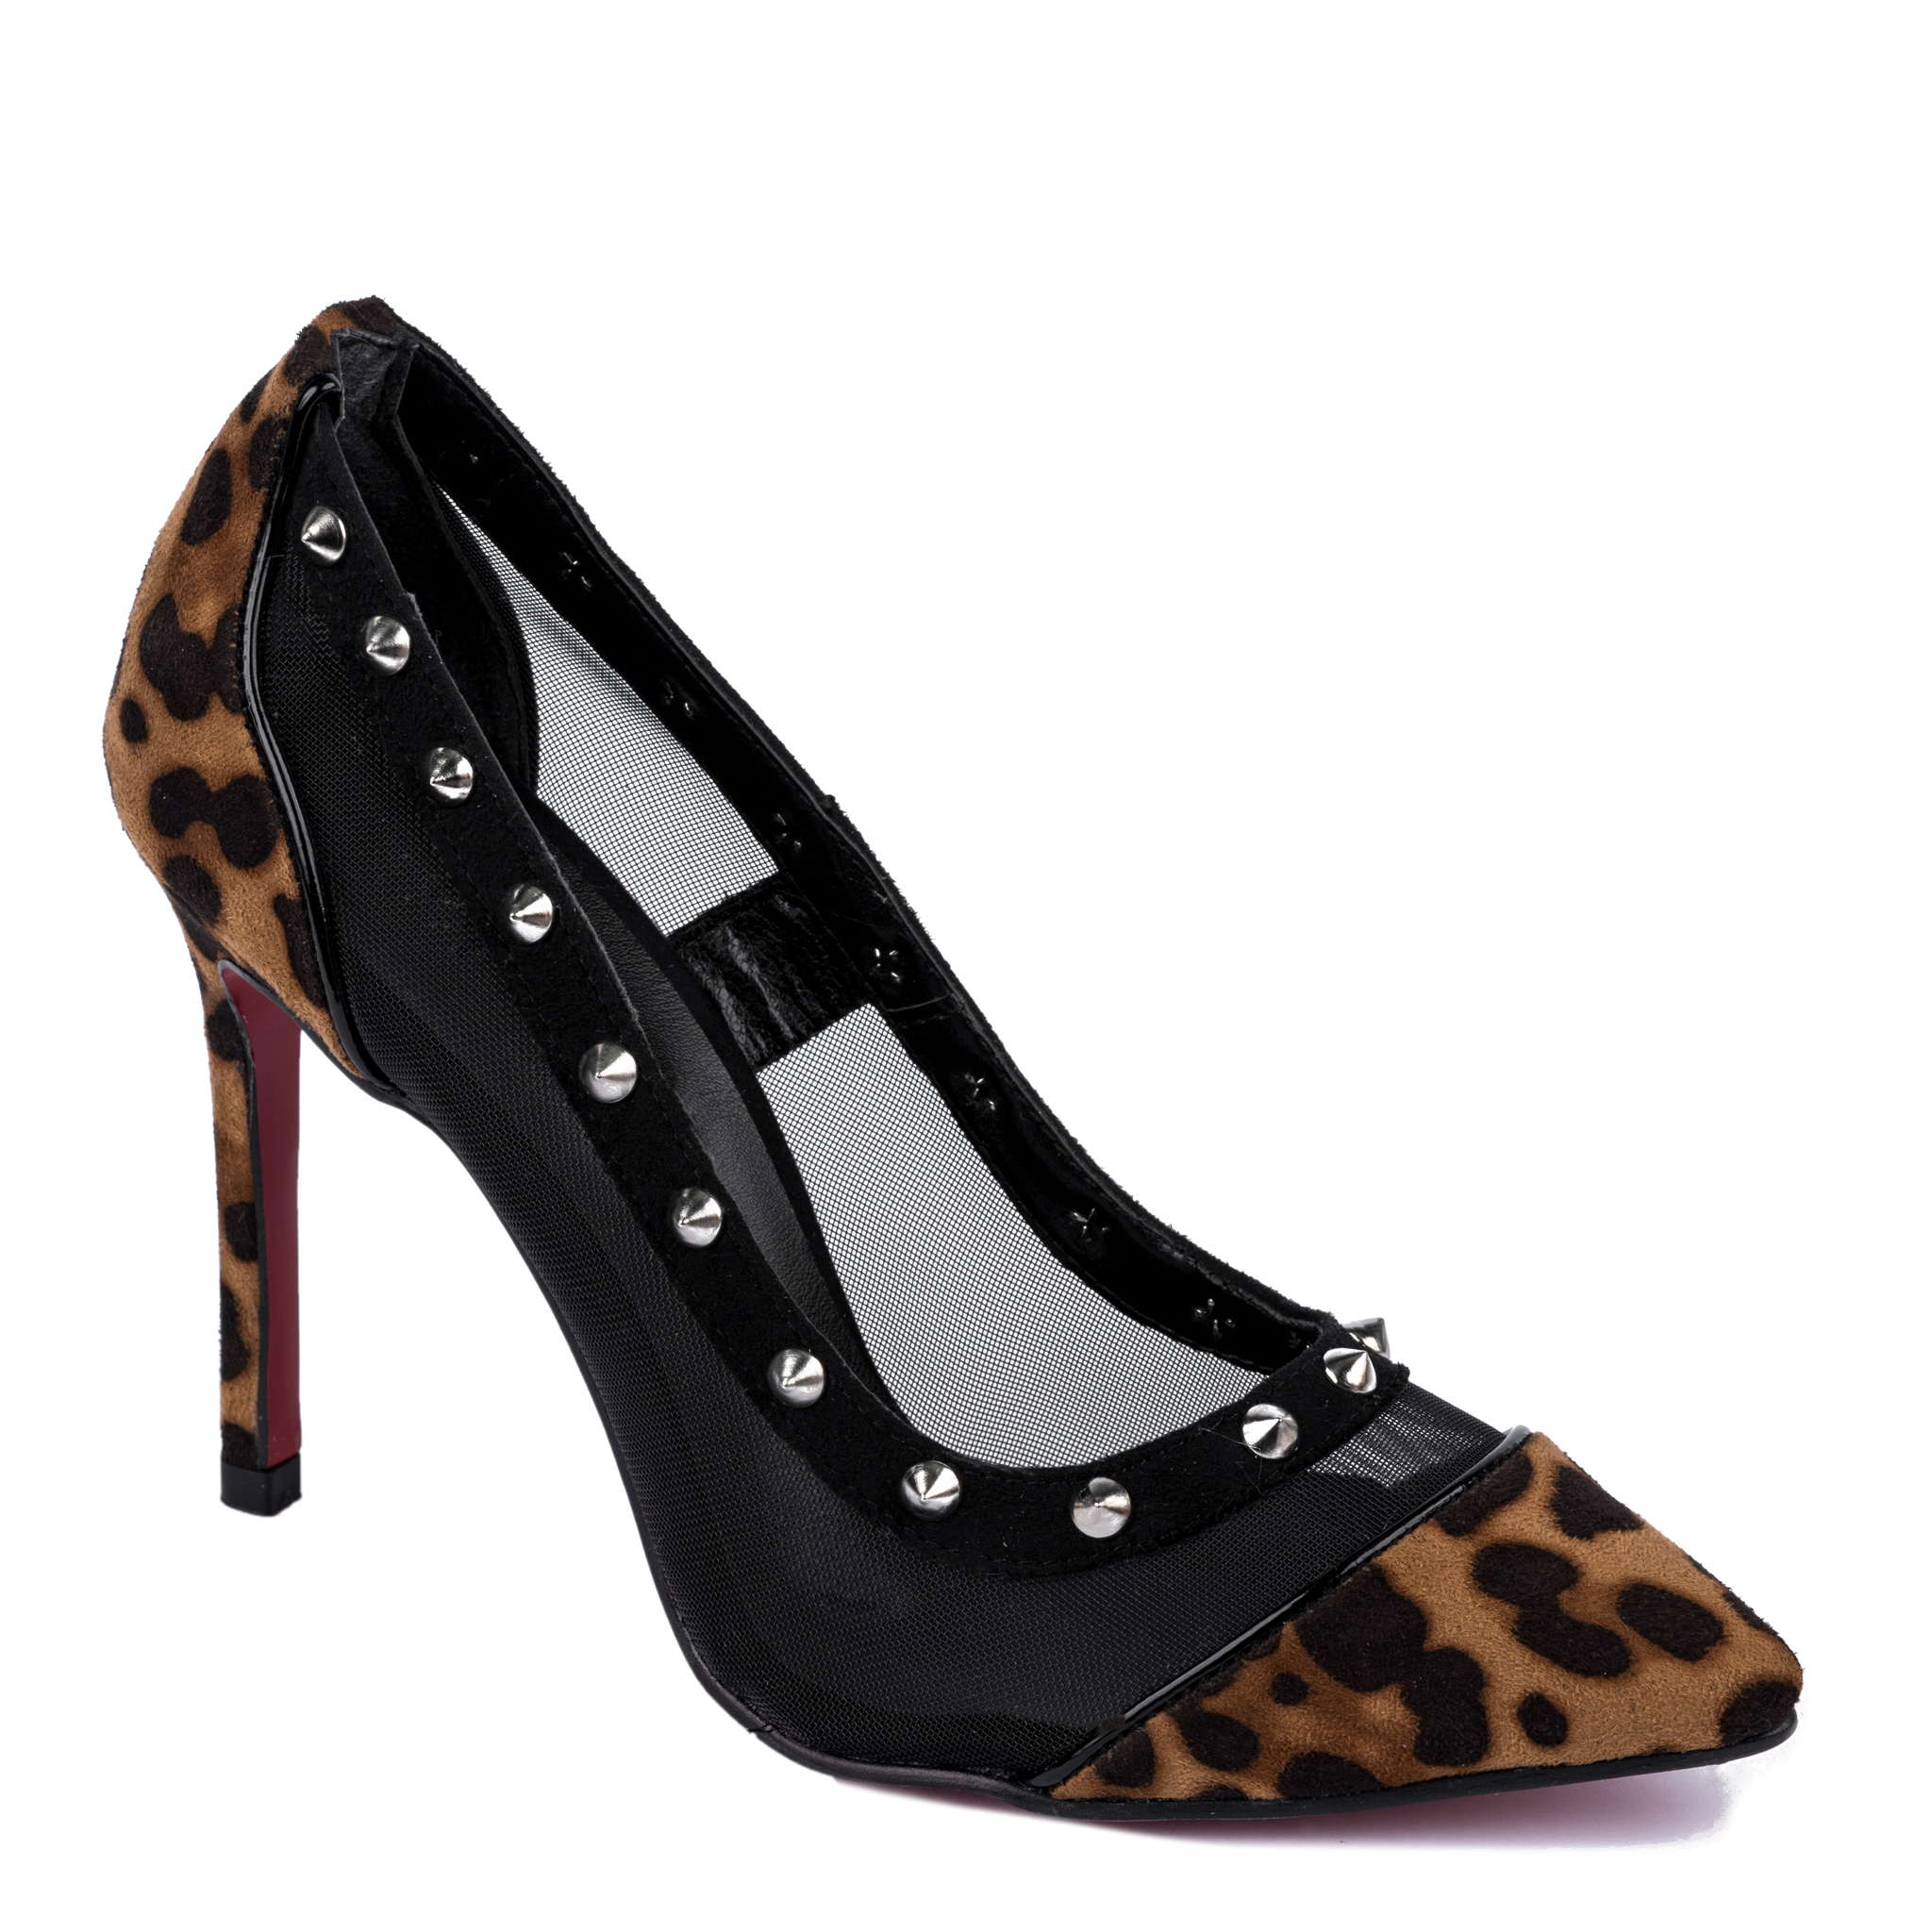 LEOPARD PRINT STILETTO THIN HELL SHOES WITH RIVETS - BLACK